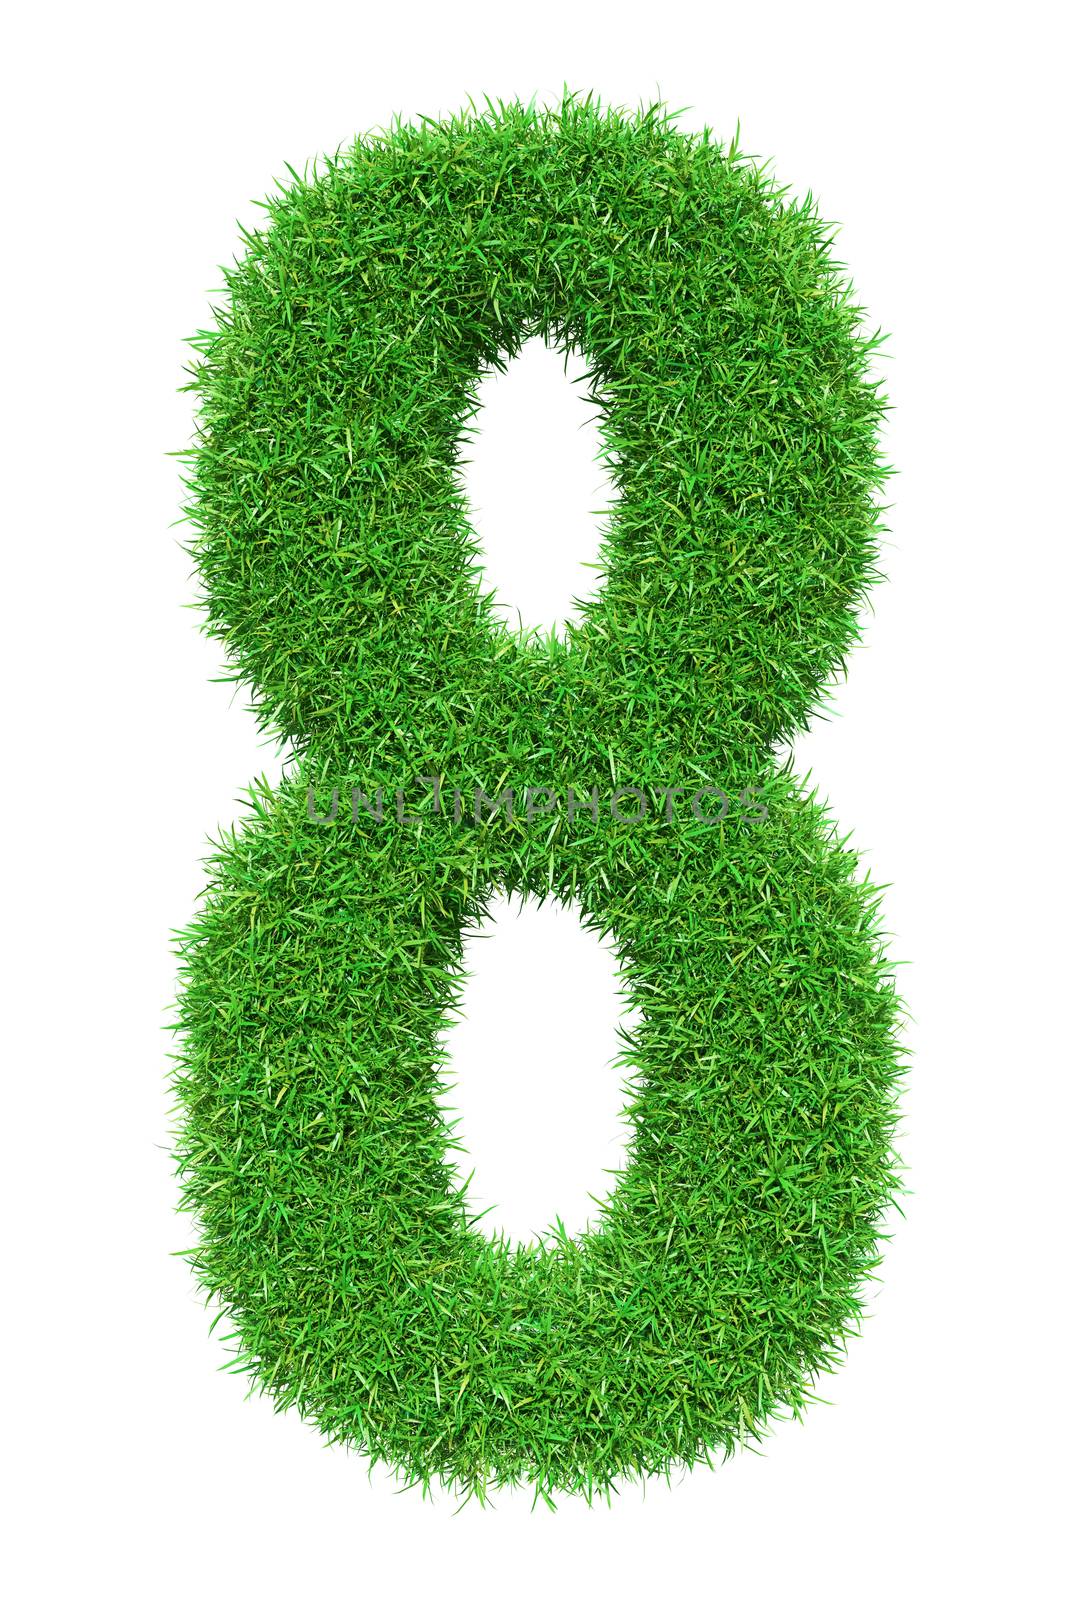 Green grass number 8, isolated on white background. 3D illustration